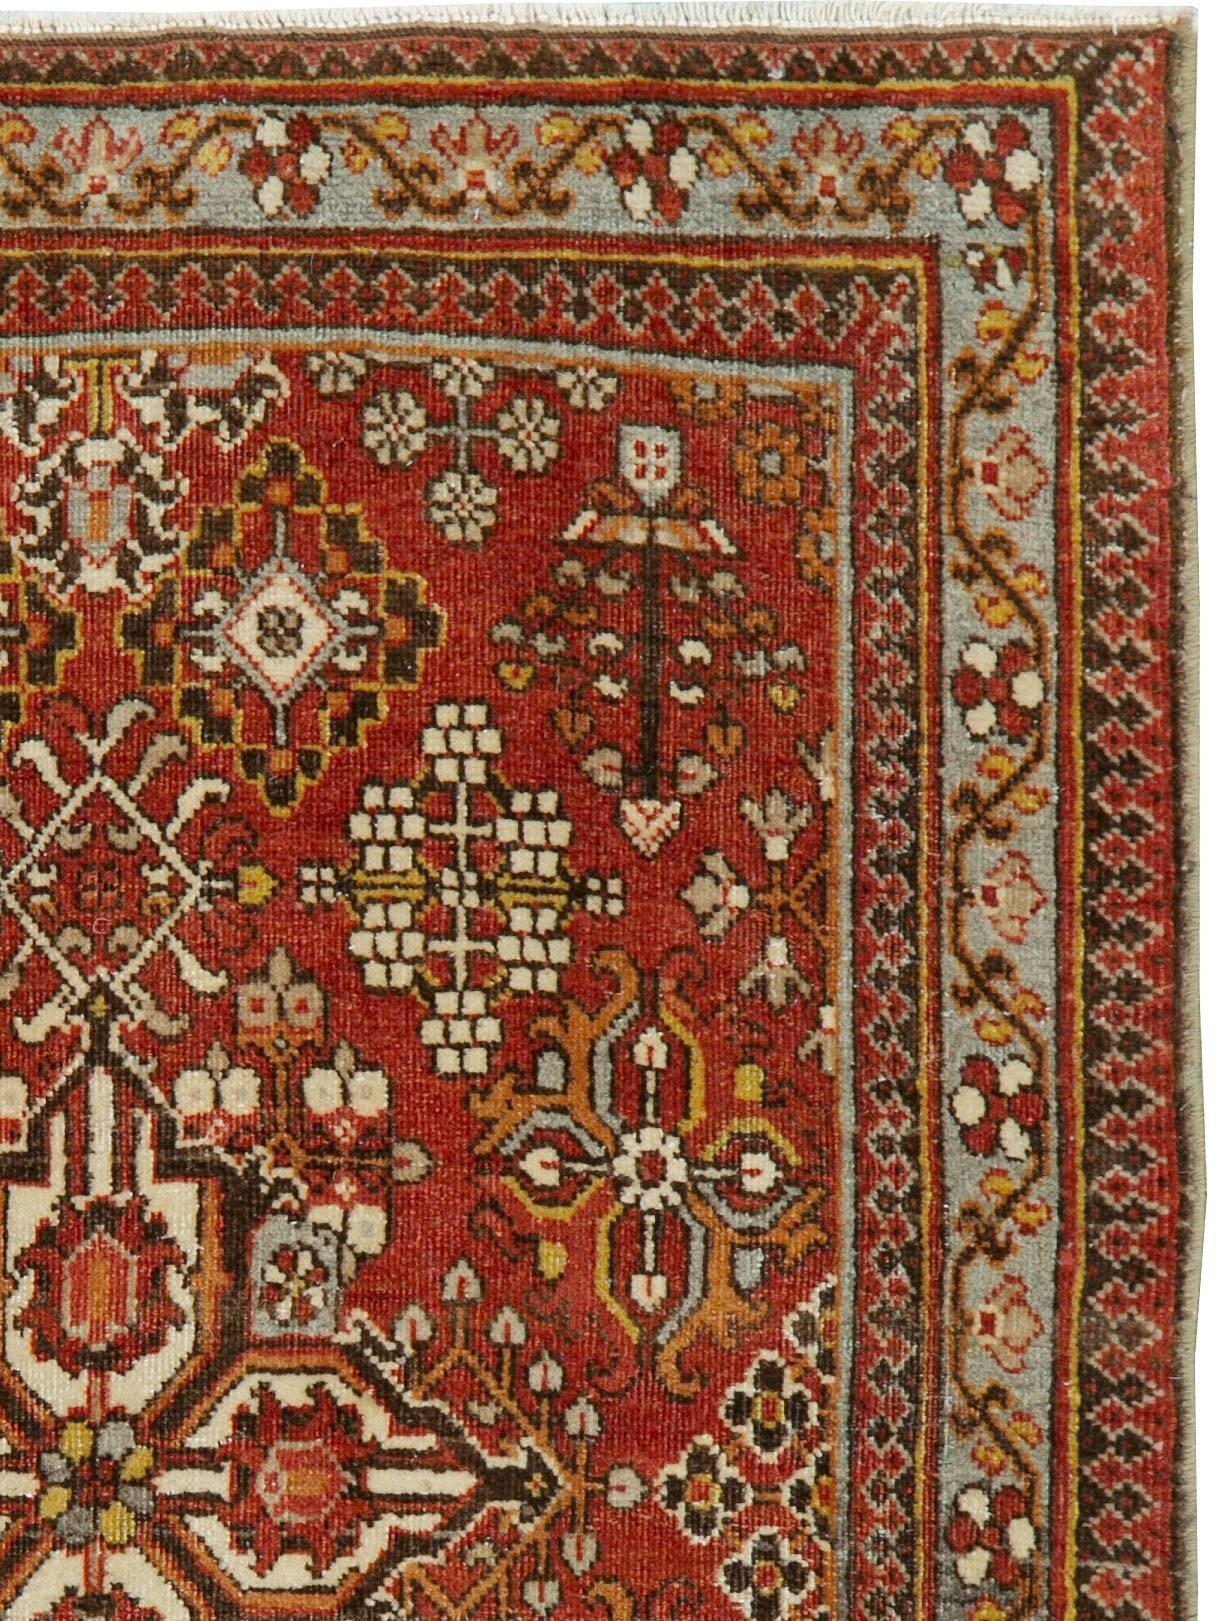 An antique Persian Joshegan rug from the early 20th century.

Measures: 2' 0